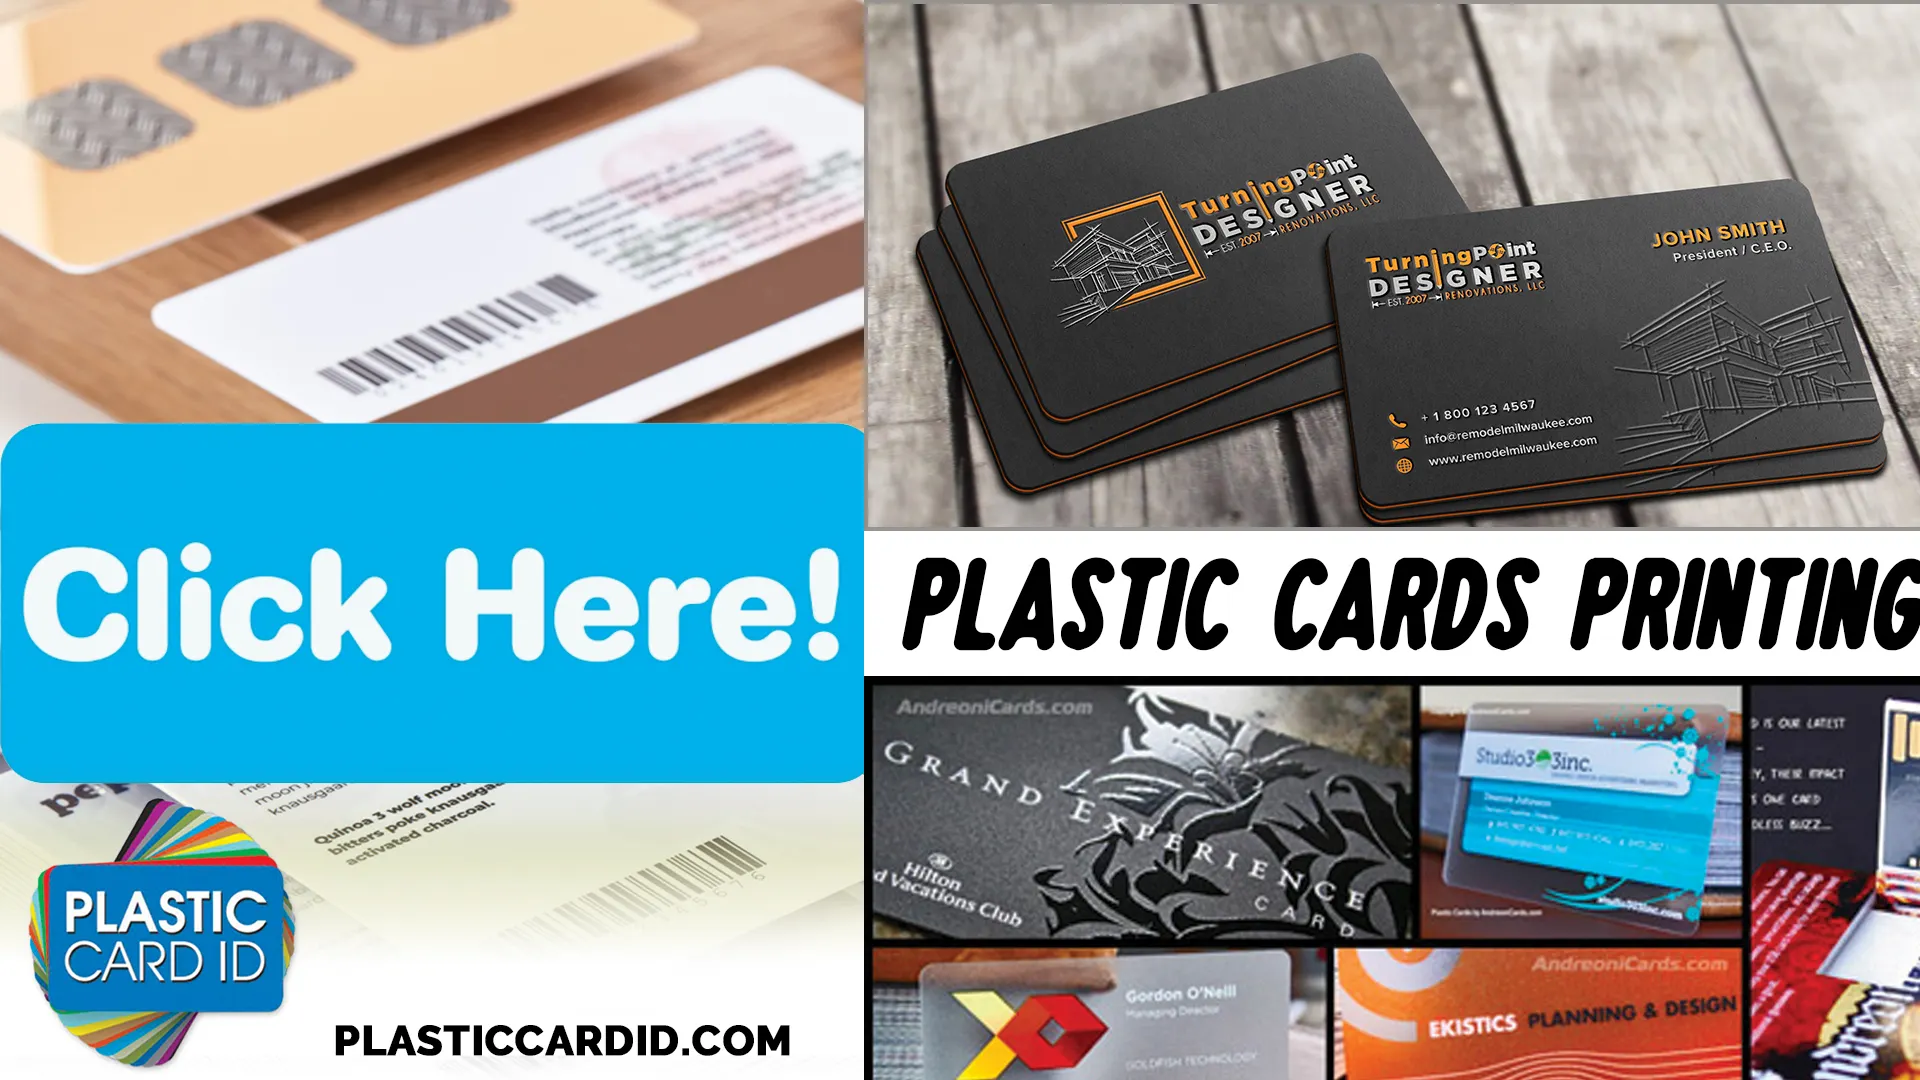 Discover the Versatility of Our Card Options